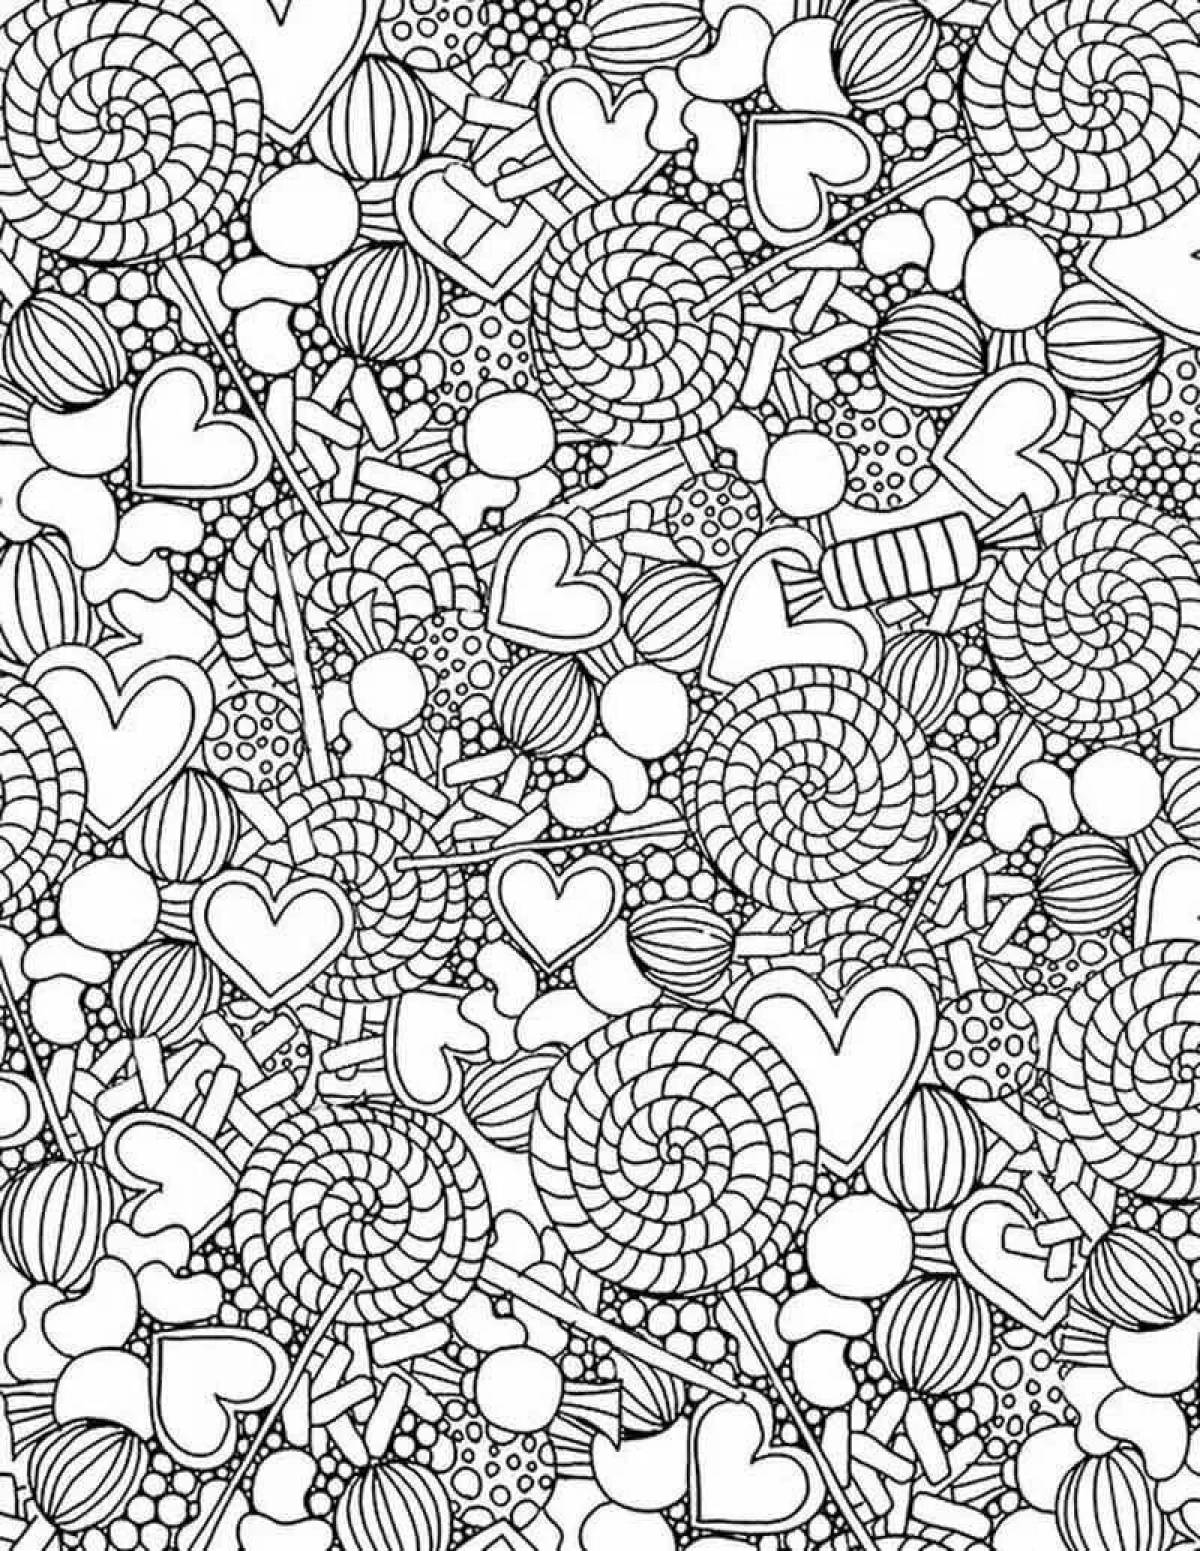 Coloring book soothing anti-stress patterns